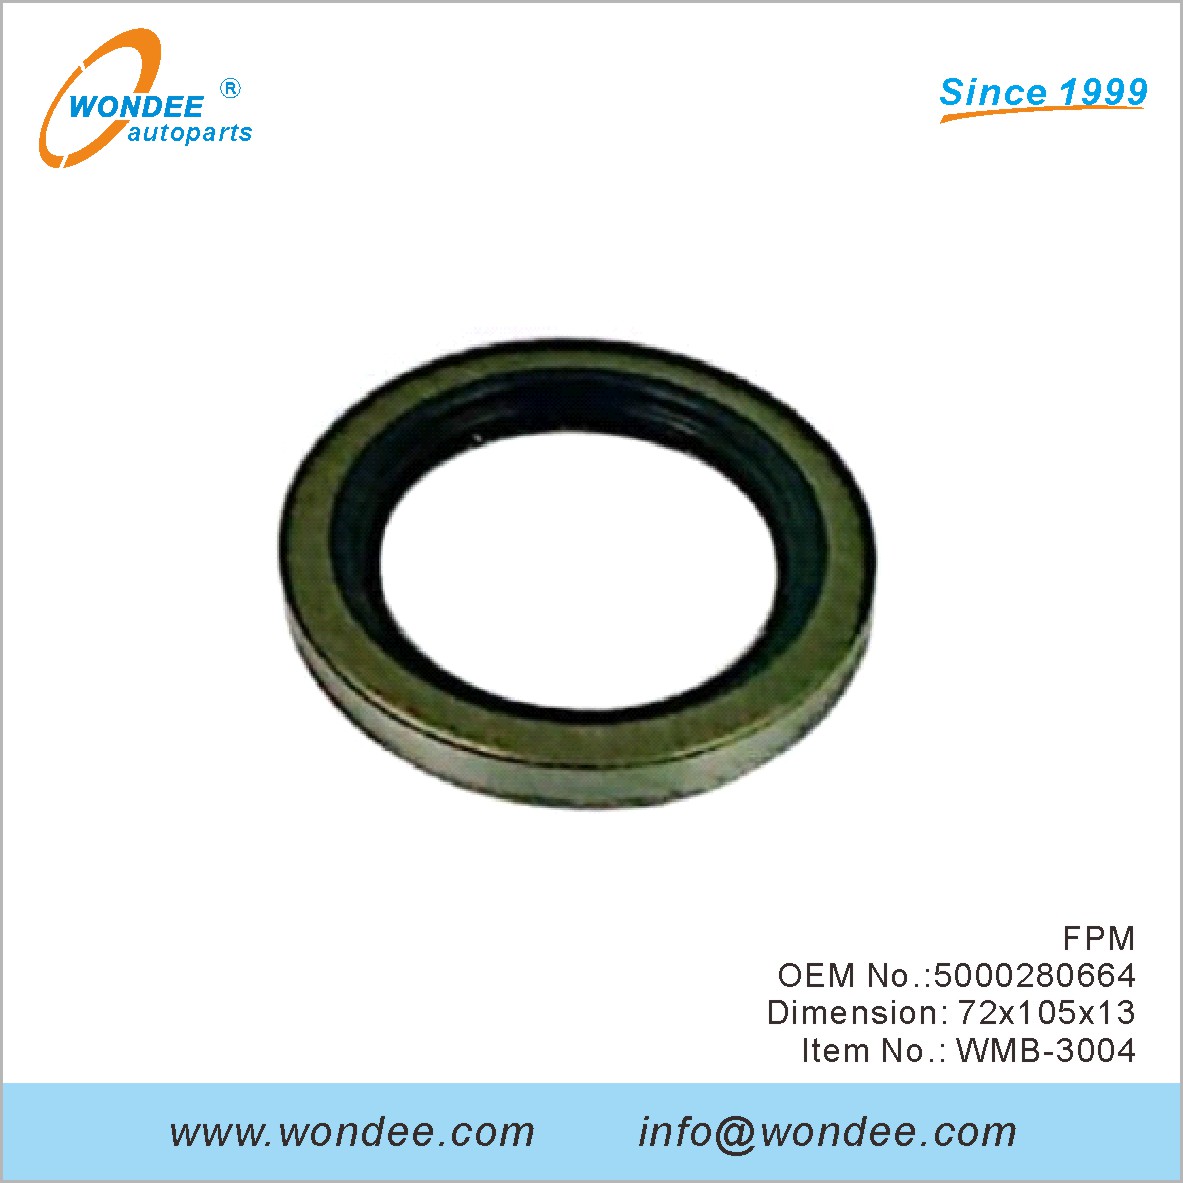 FPM OEM 5000280664 for Benz from WONDEE